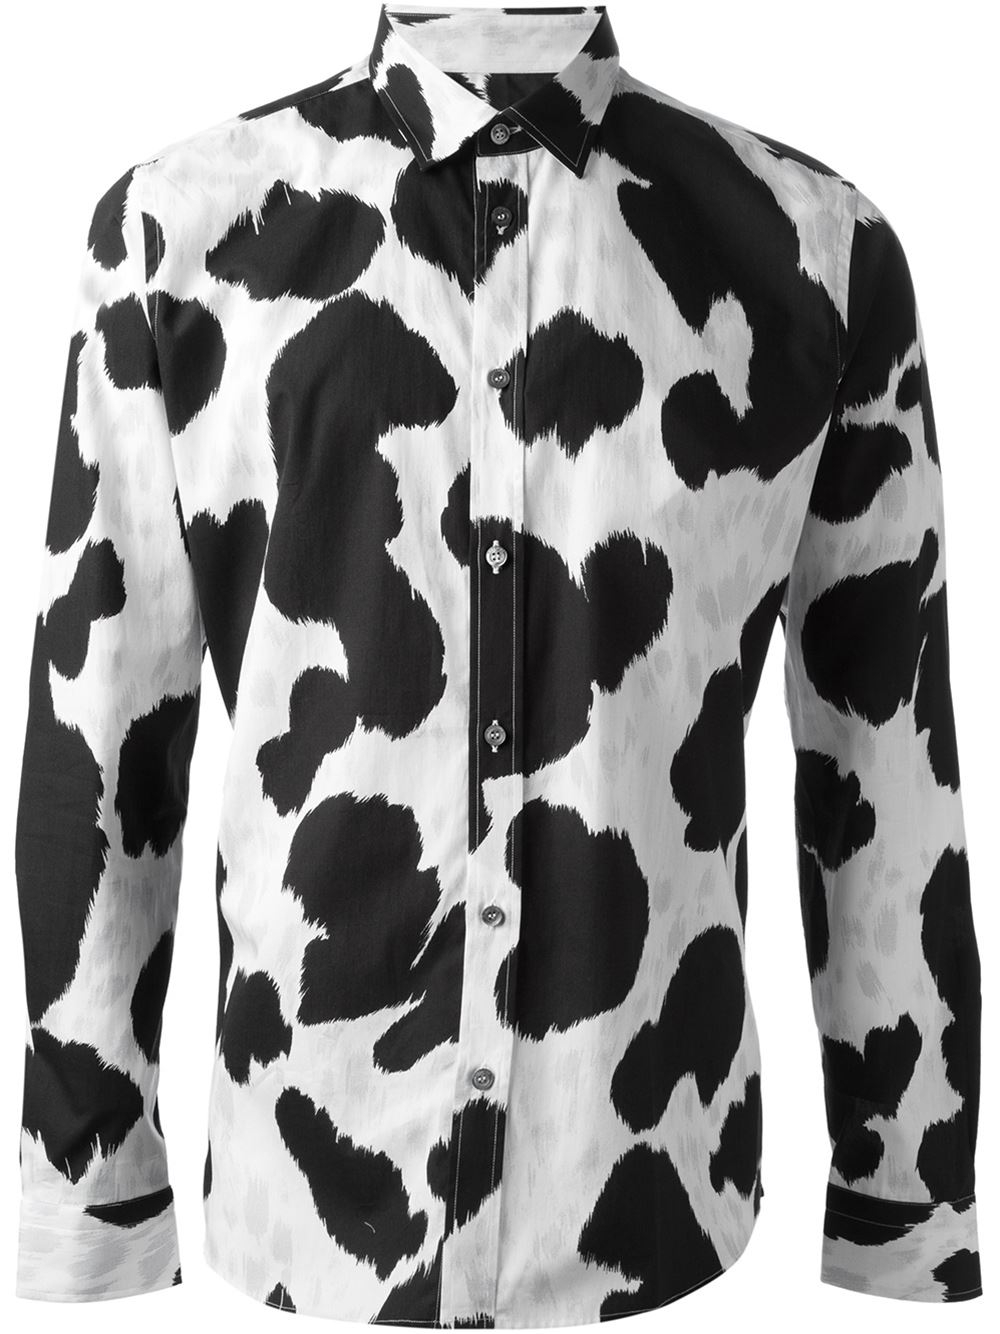 Lyst - Moschino Cow Hide Print Shirt in Black for Men